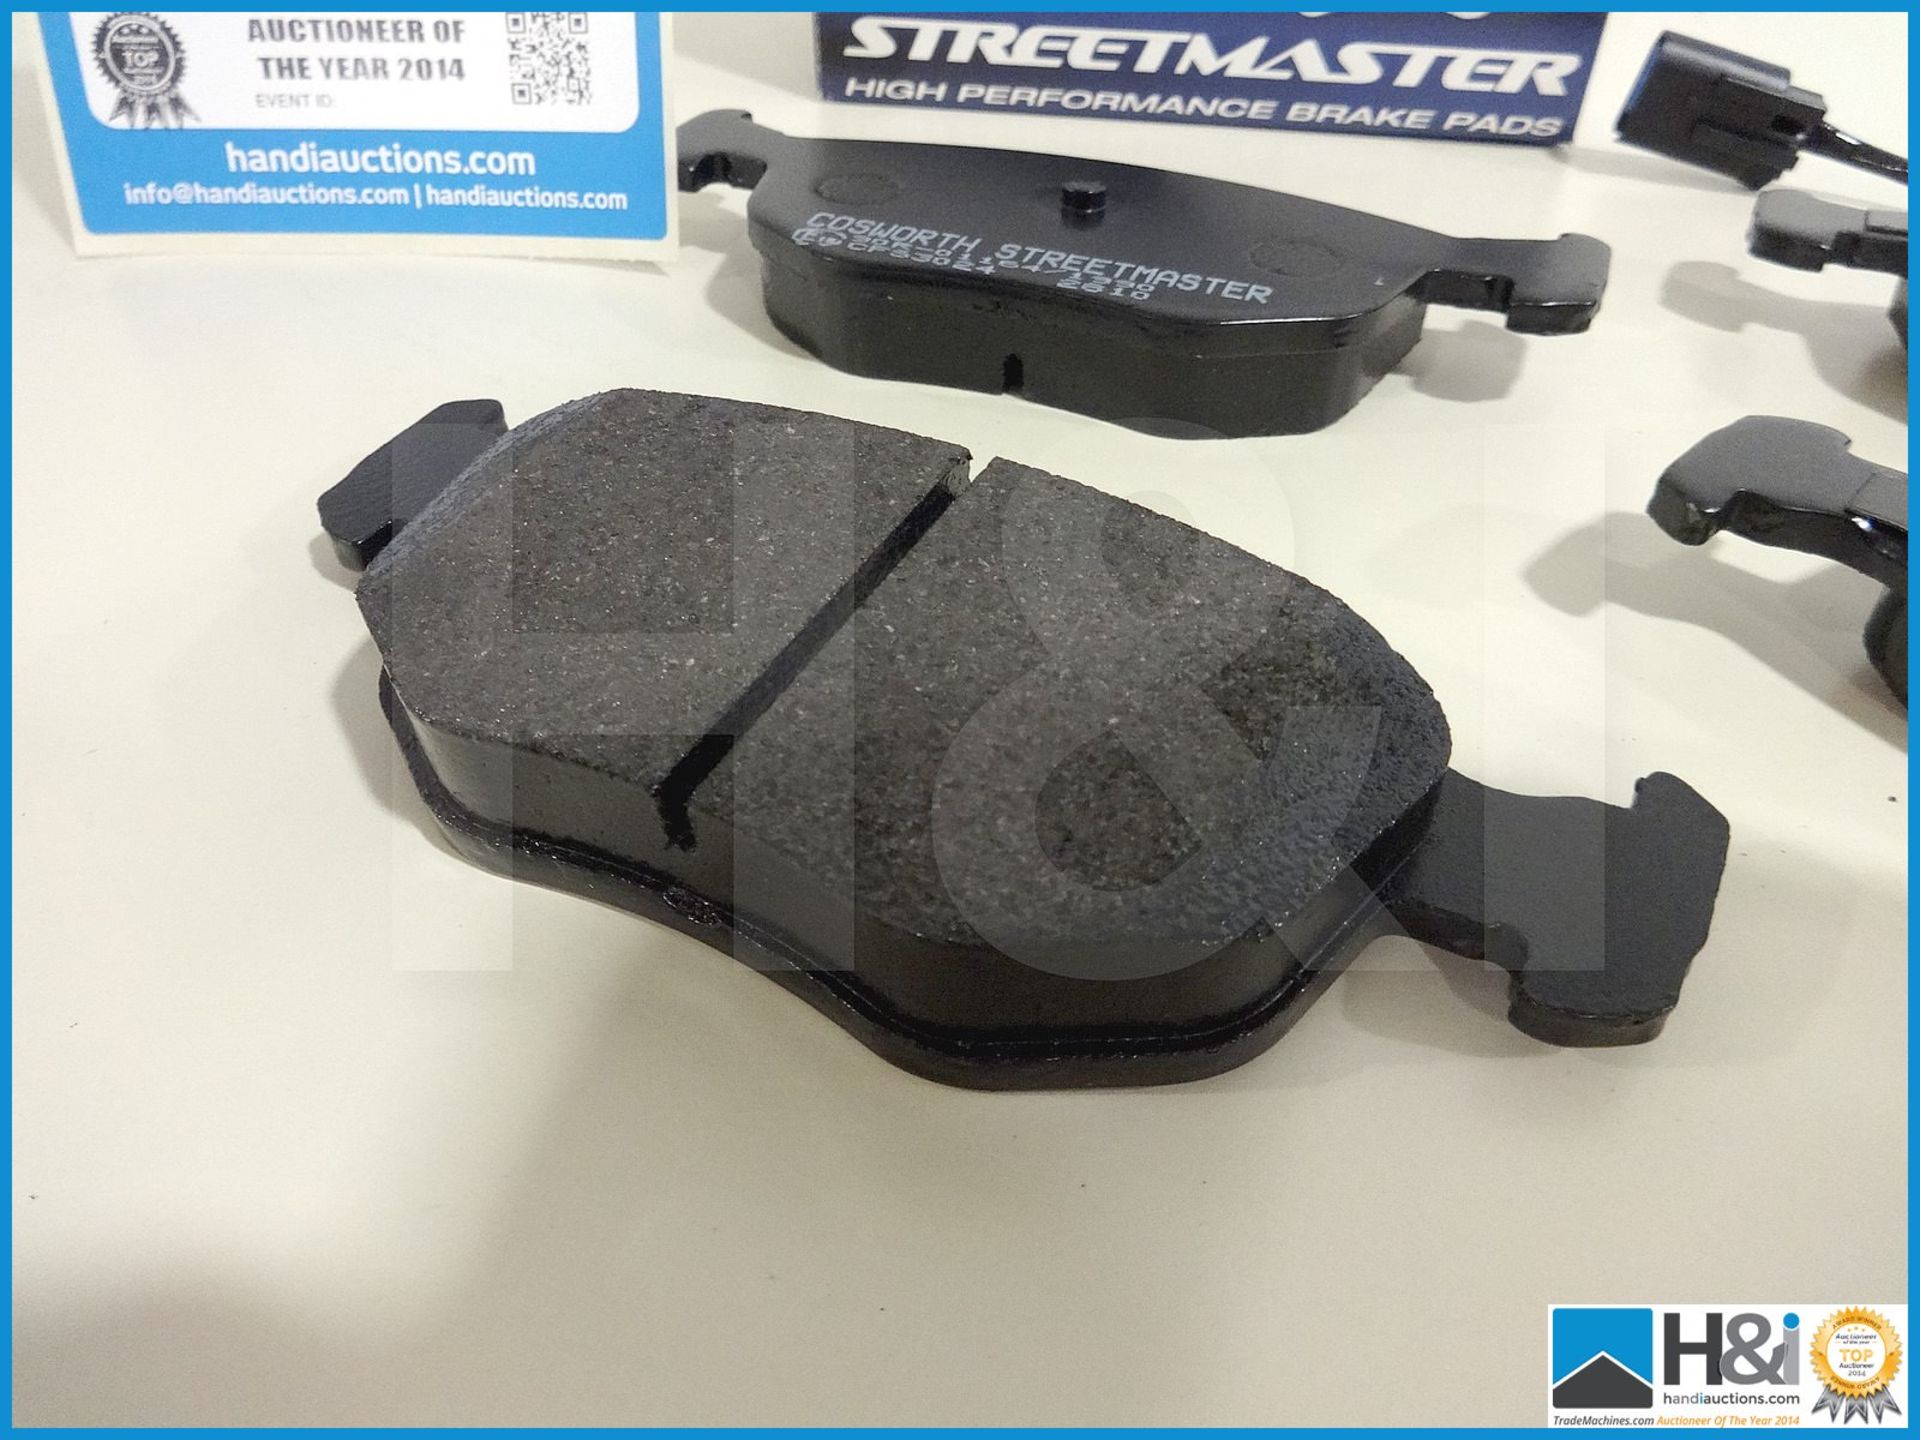 10 off Escort Cosworth 4WD 92-95 front brake pads. New and boxed. MC: CFS3024 CILN: 14 - Bild 3 aus 5